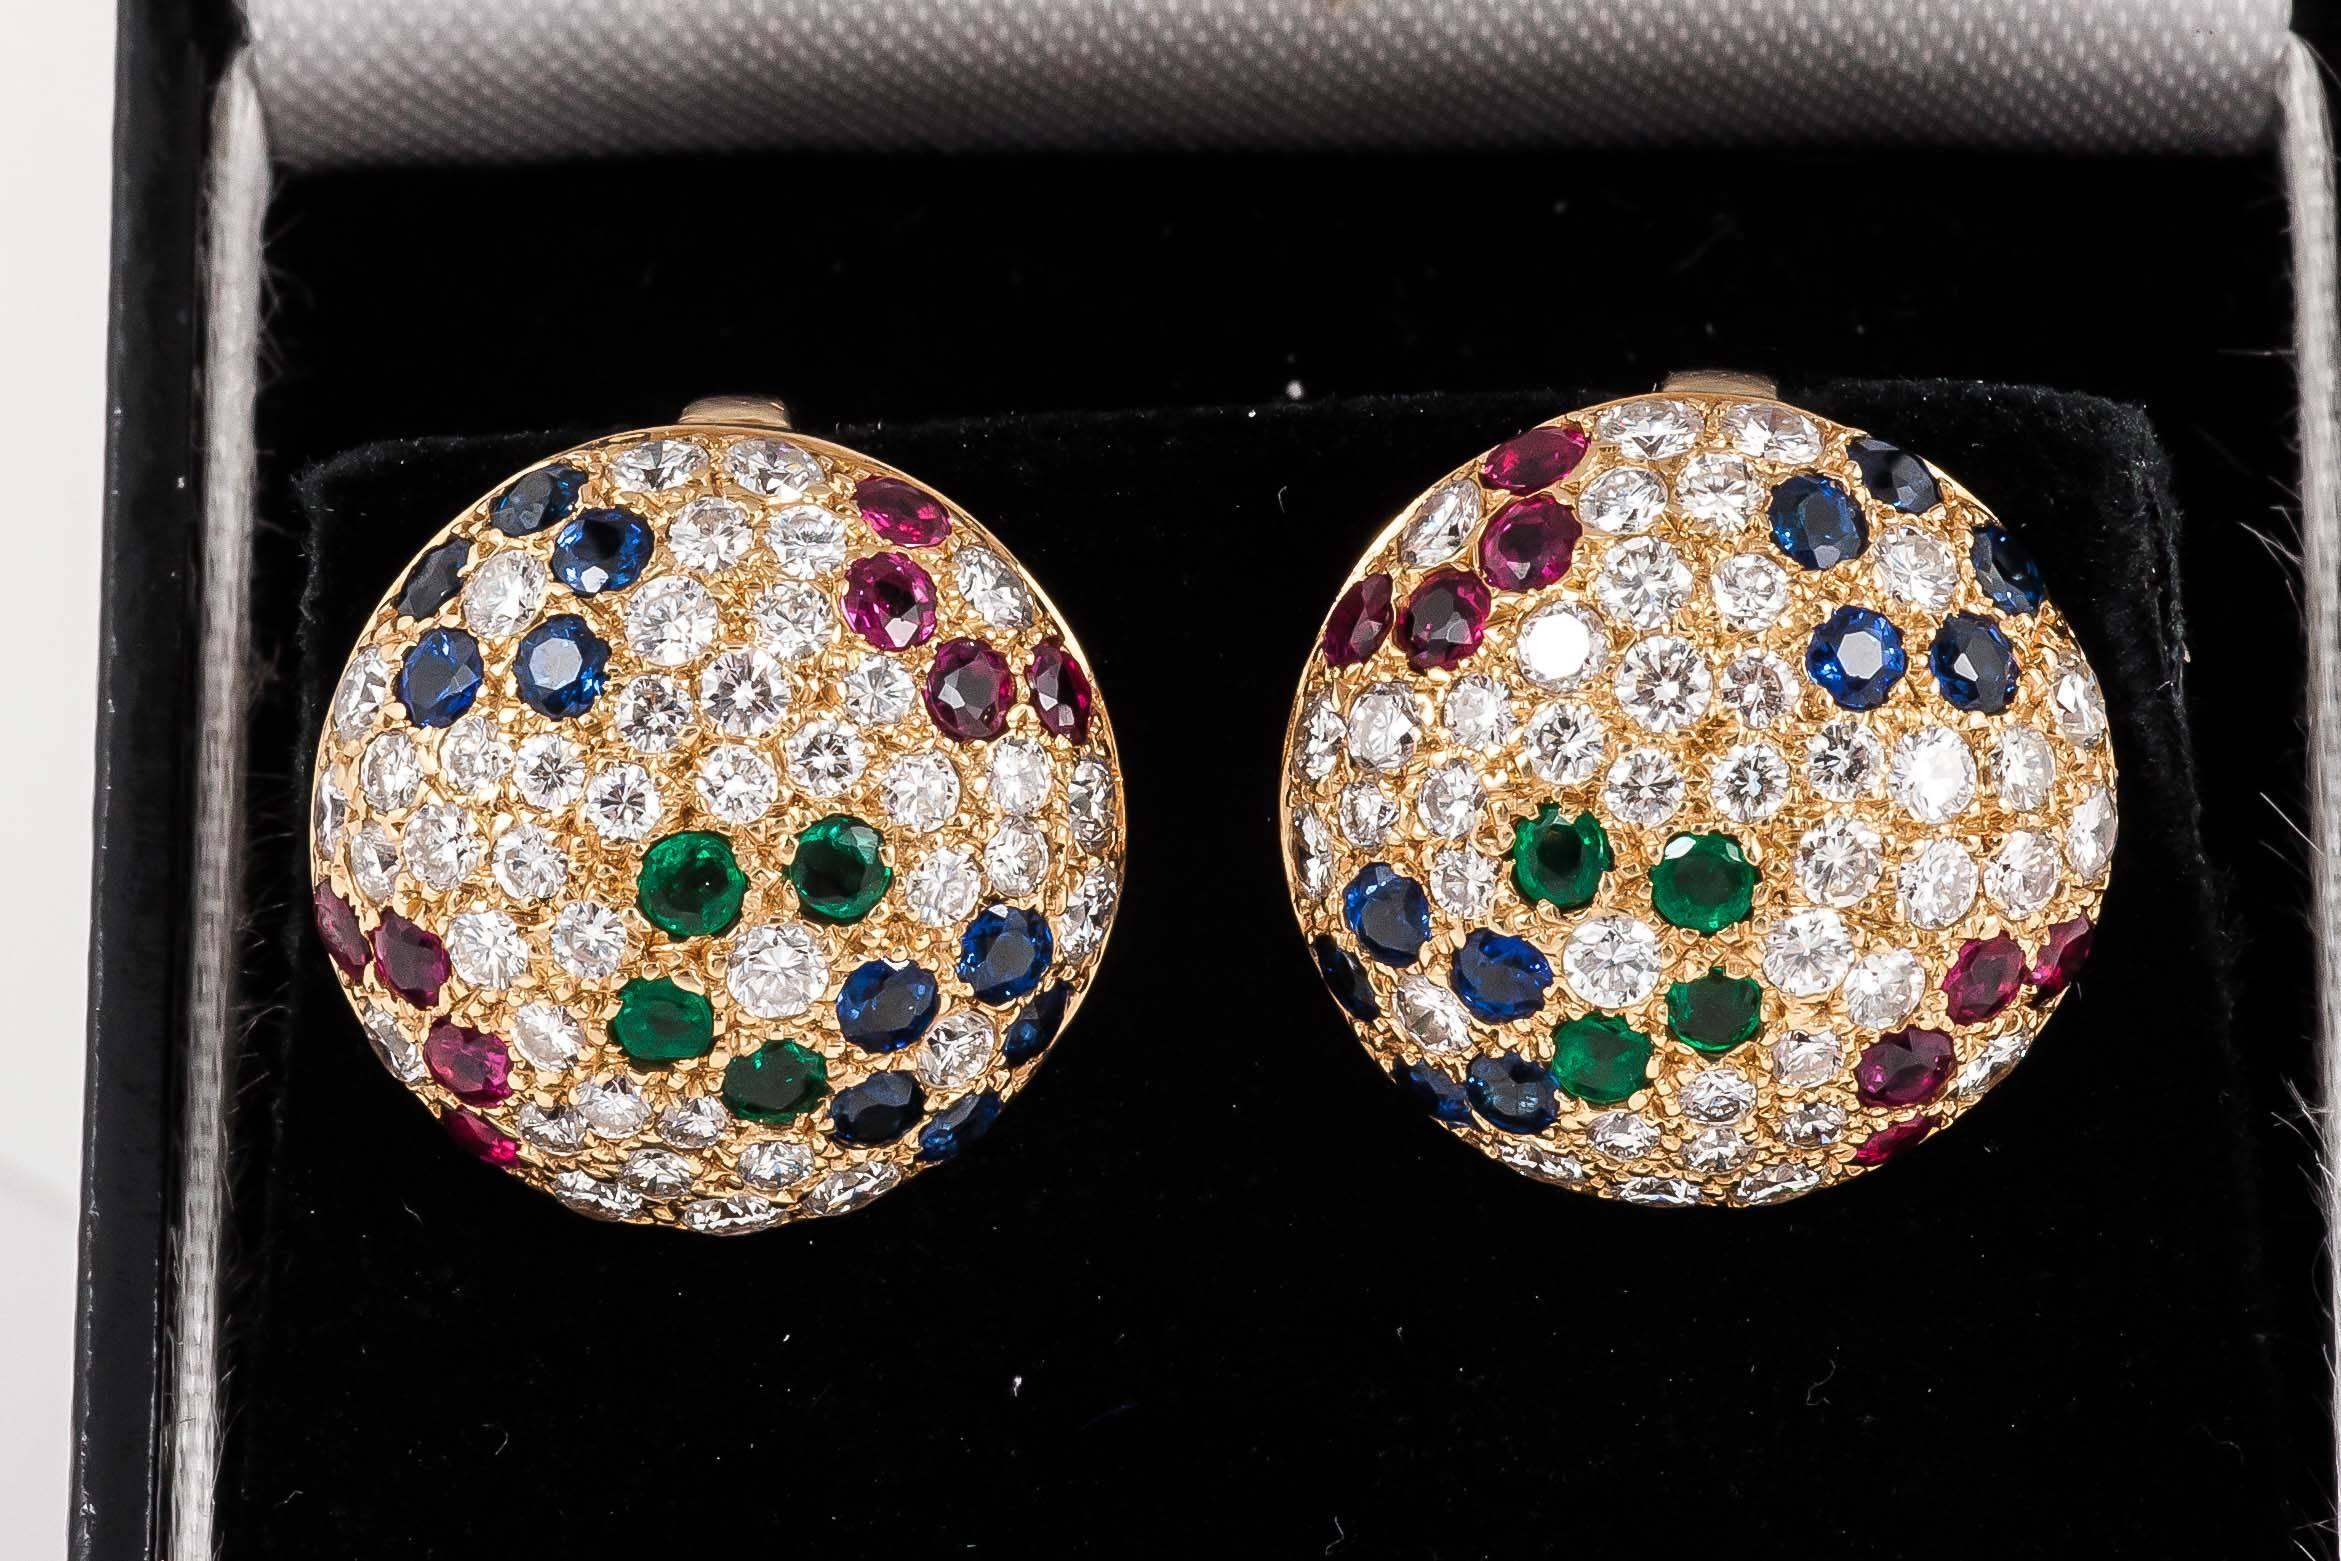 A fine quality pair of 1980’s vintage bombe shaped, pave set cluster earrings, set with bright coloured, brilliant cut diamonds, emeralds, rubies and sapphires in 18 karat yellow gold. Clip fittings. French marks.
Measures 16mm across.
1980's